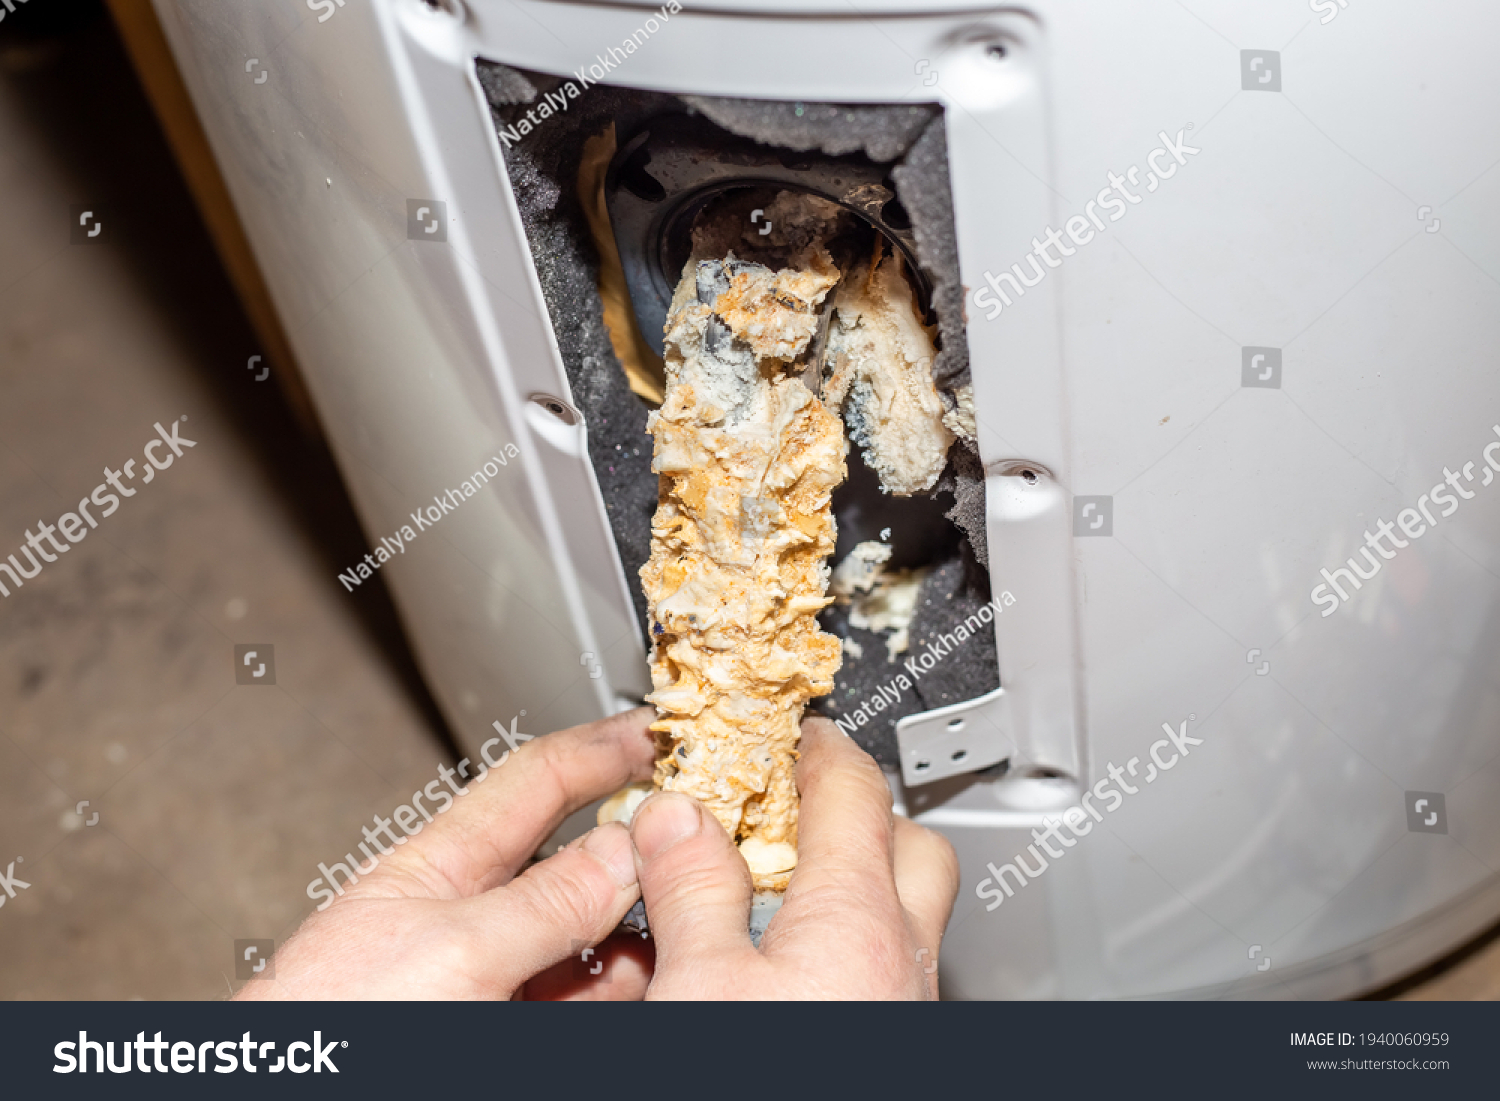 Repair and maintenance of boilers. The master plumber pulls out a tubular electric heater covered with lime scale from the hole in the boiler. #1940060959